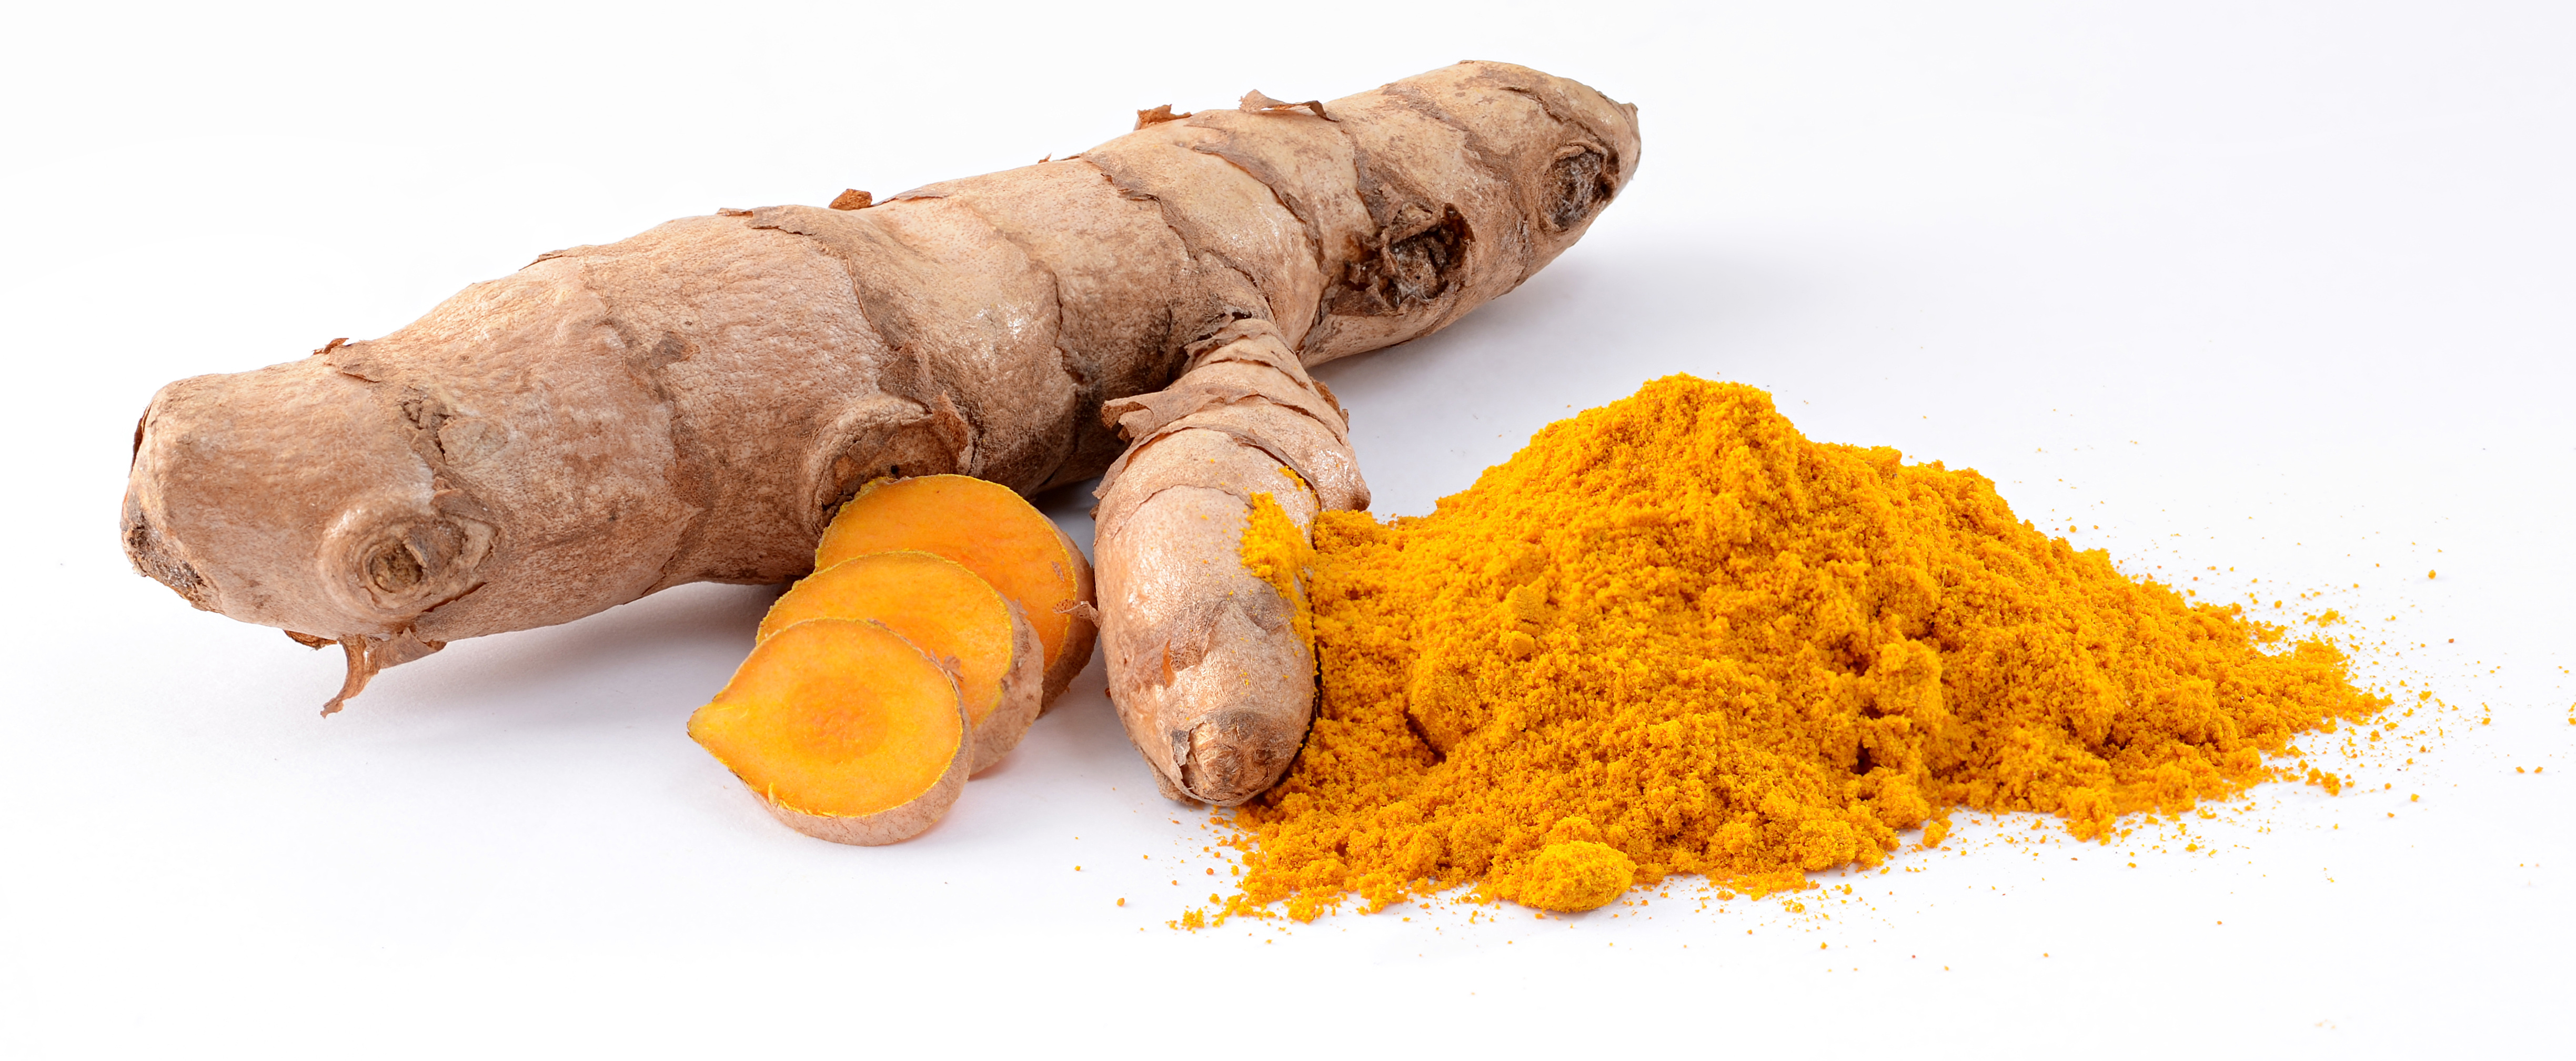 Turmeric uses, dosage, side effects, interactions,